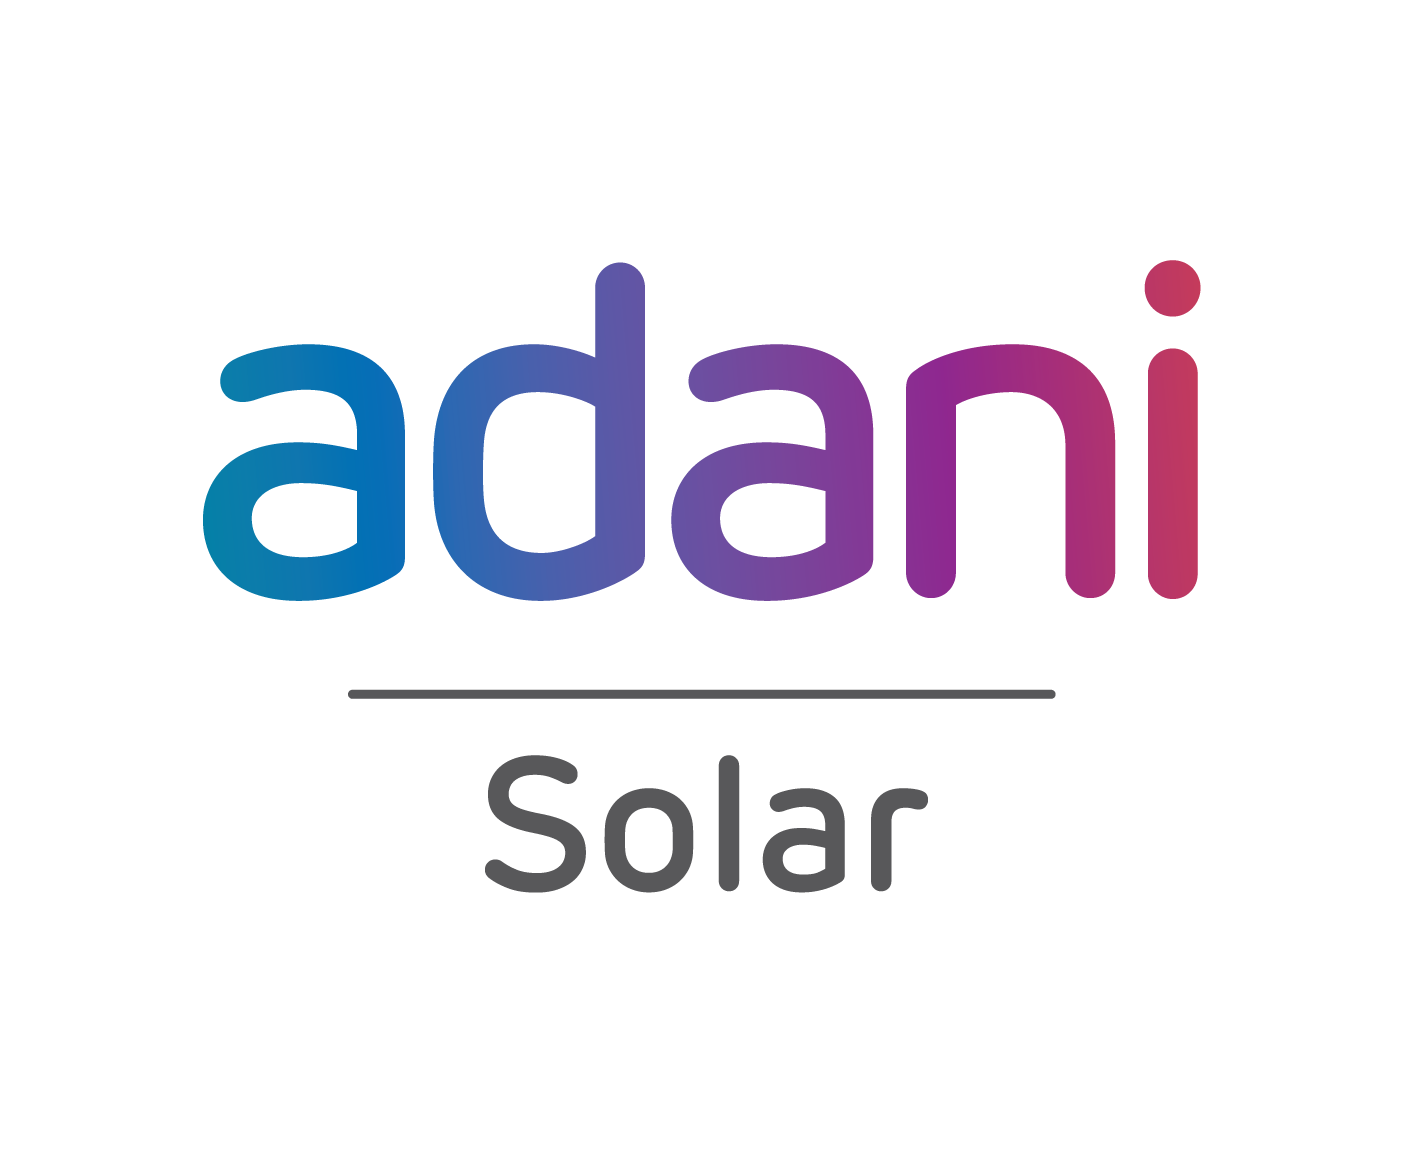 Adani Solar Wins “Top Performer” at PVEL PQP Awards for 4th Consecutive Year - SolarQuarter